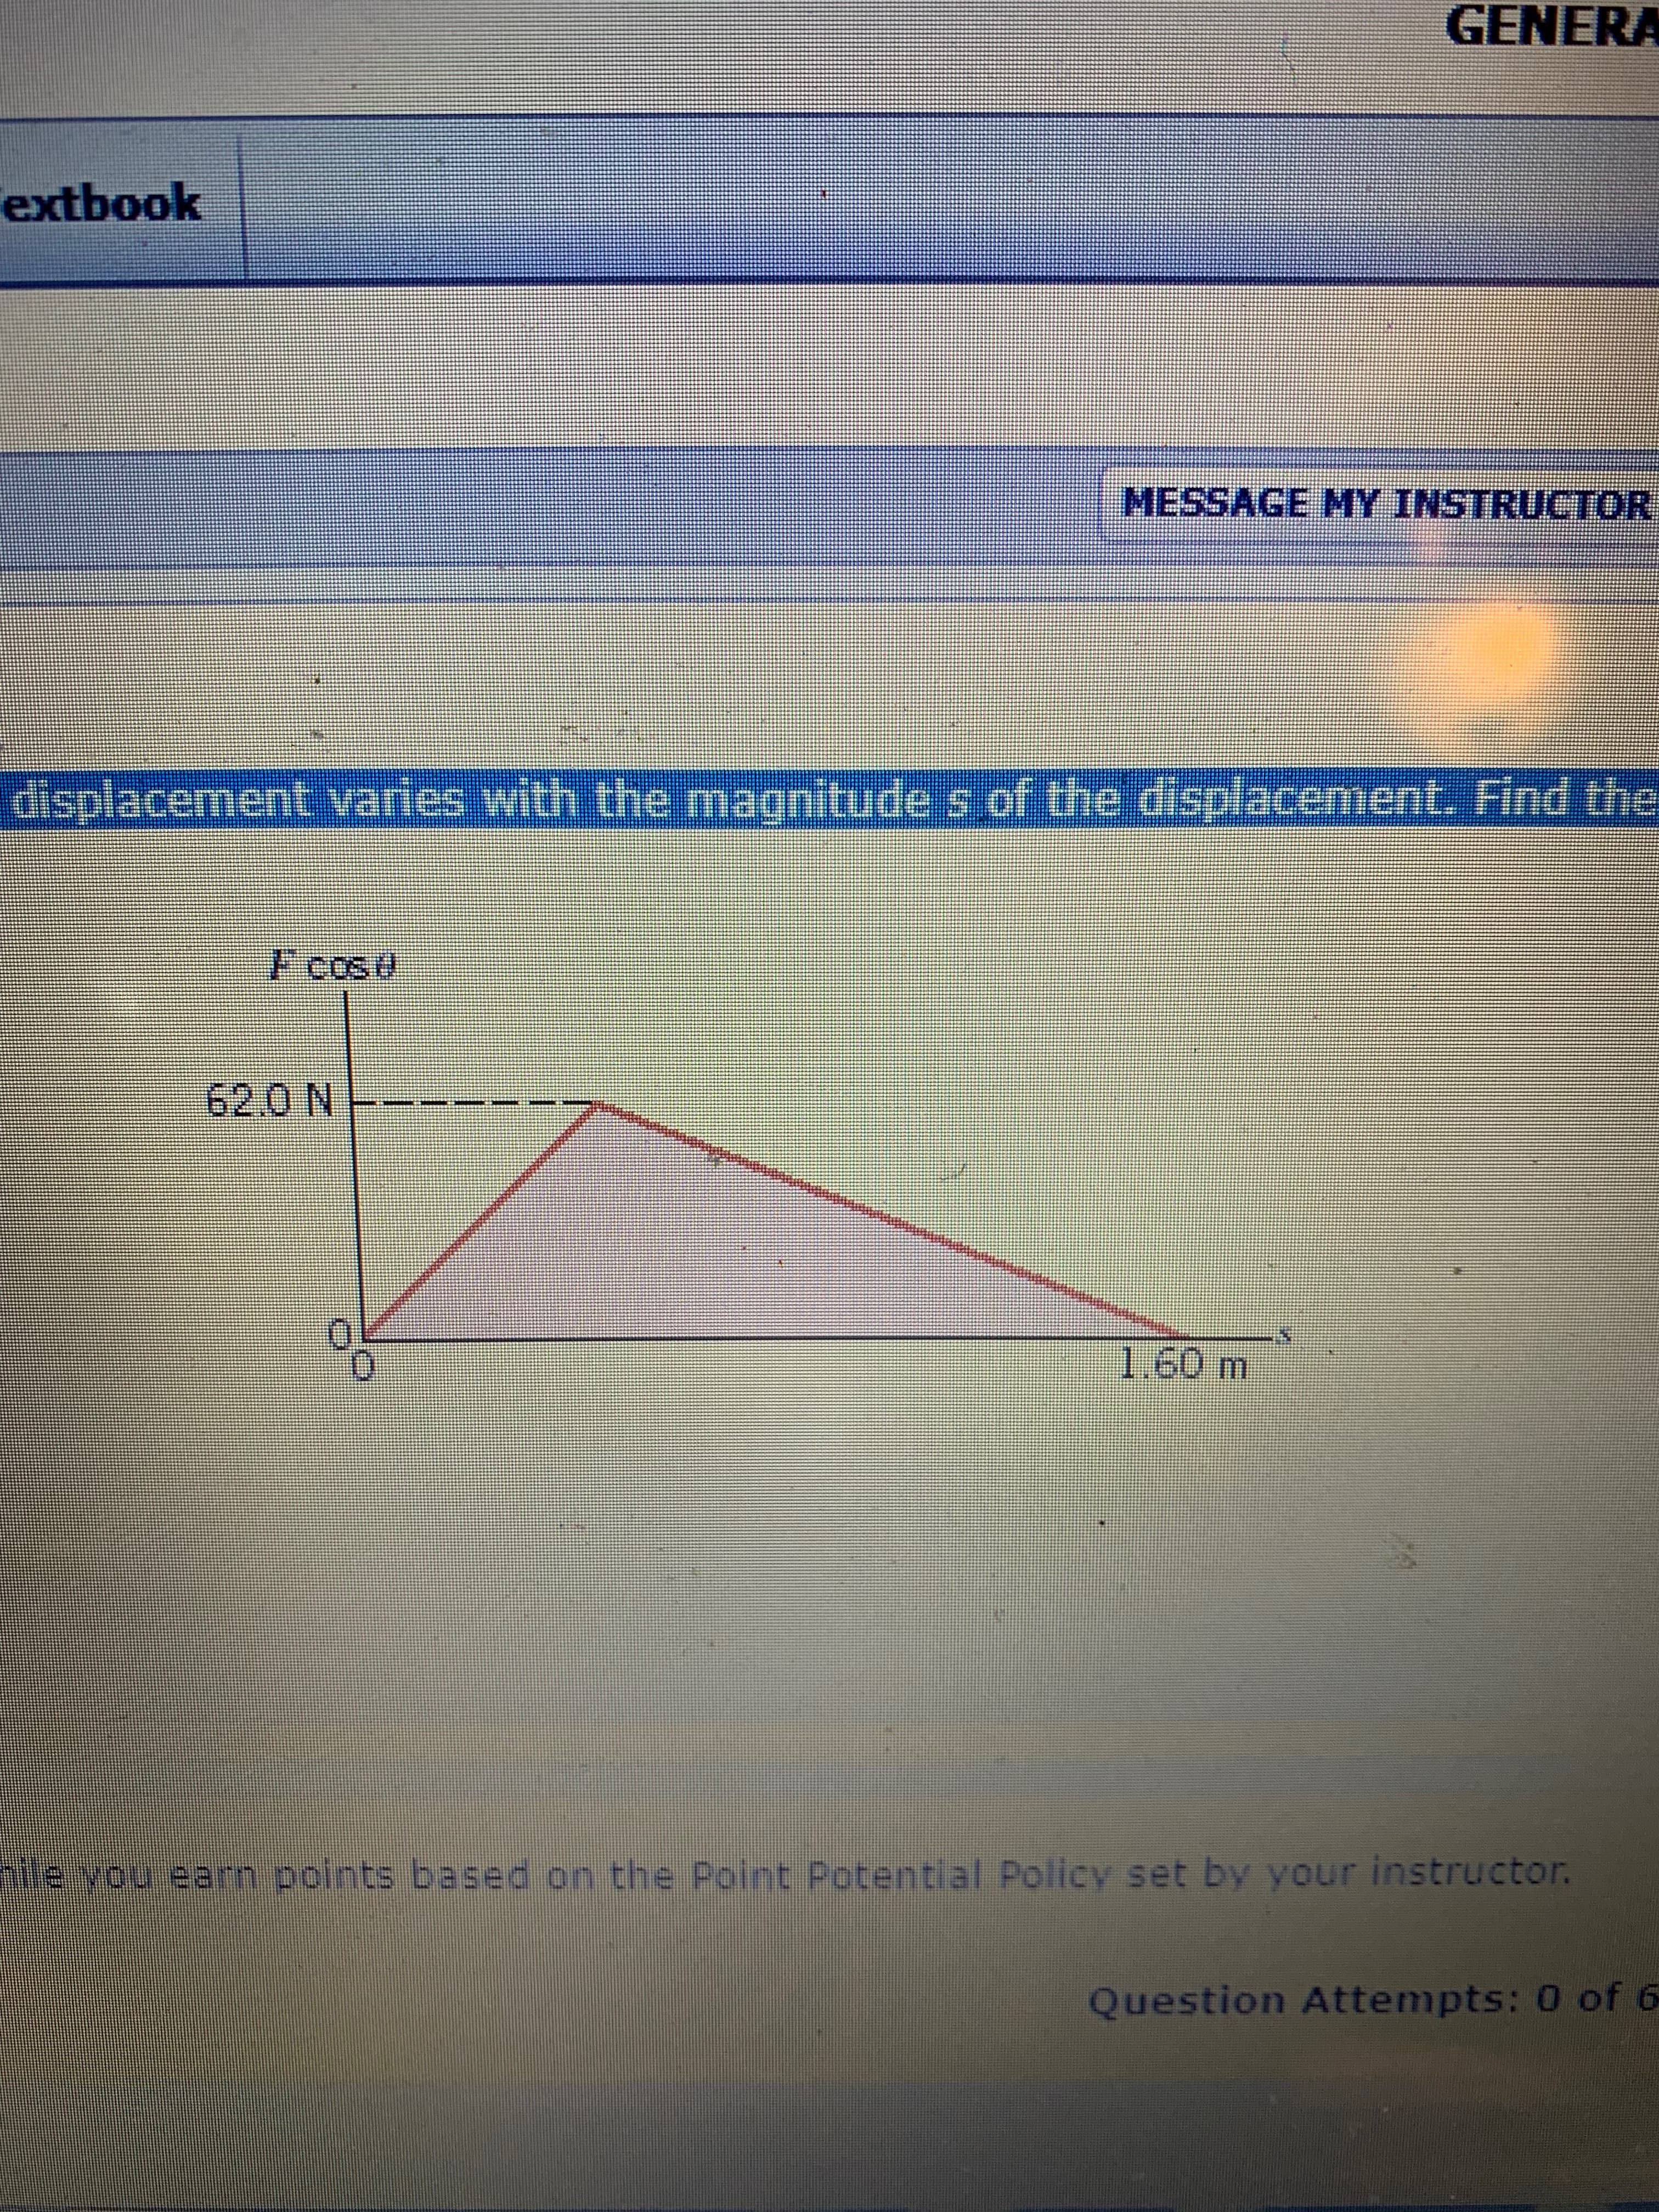 GENERA
extbook
MESSAGE MY INSTRUCTOR
displacement varles with the magnitude s of the displacement. Find the
F cos
62.0 N
1.60 m
le you earn points based on the Point Potential Policy set by your instructor.
Question Attempts: 0 of 6
